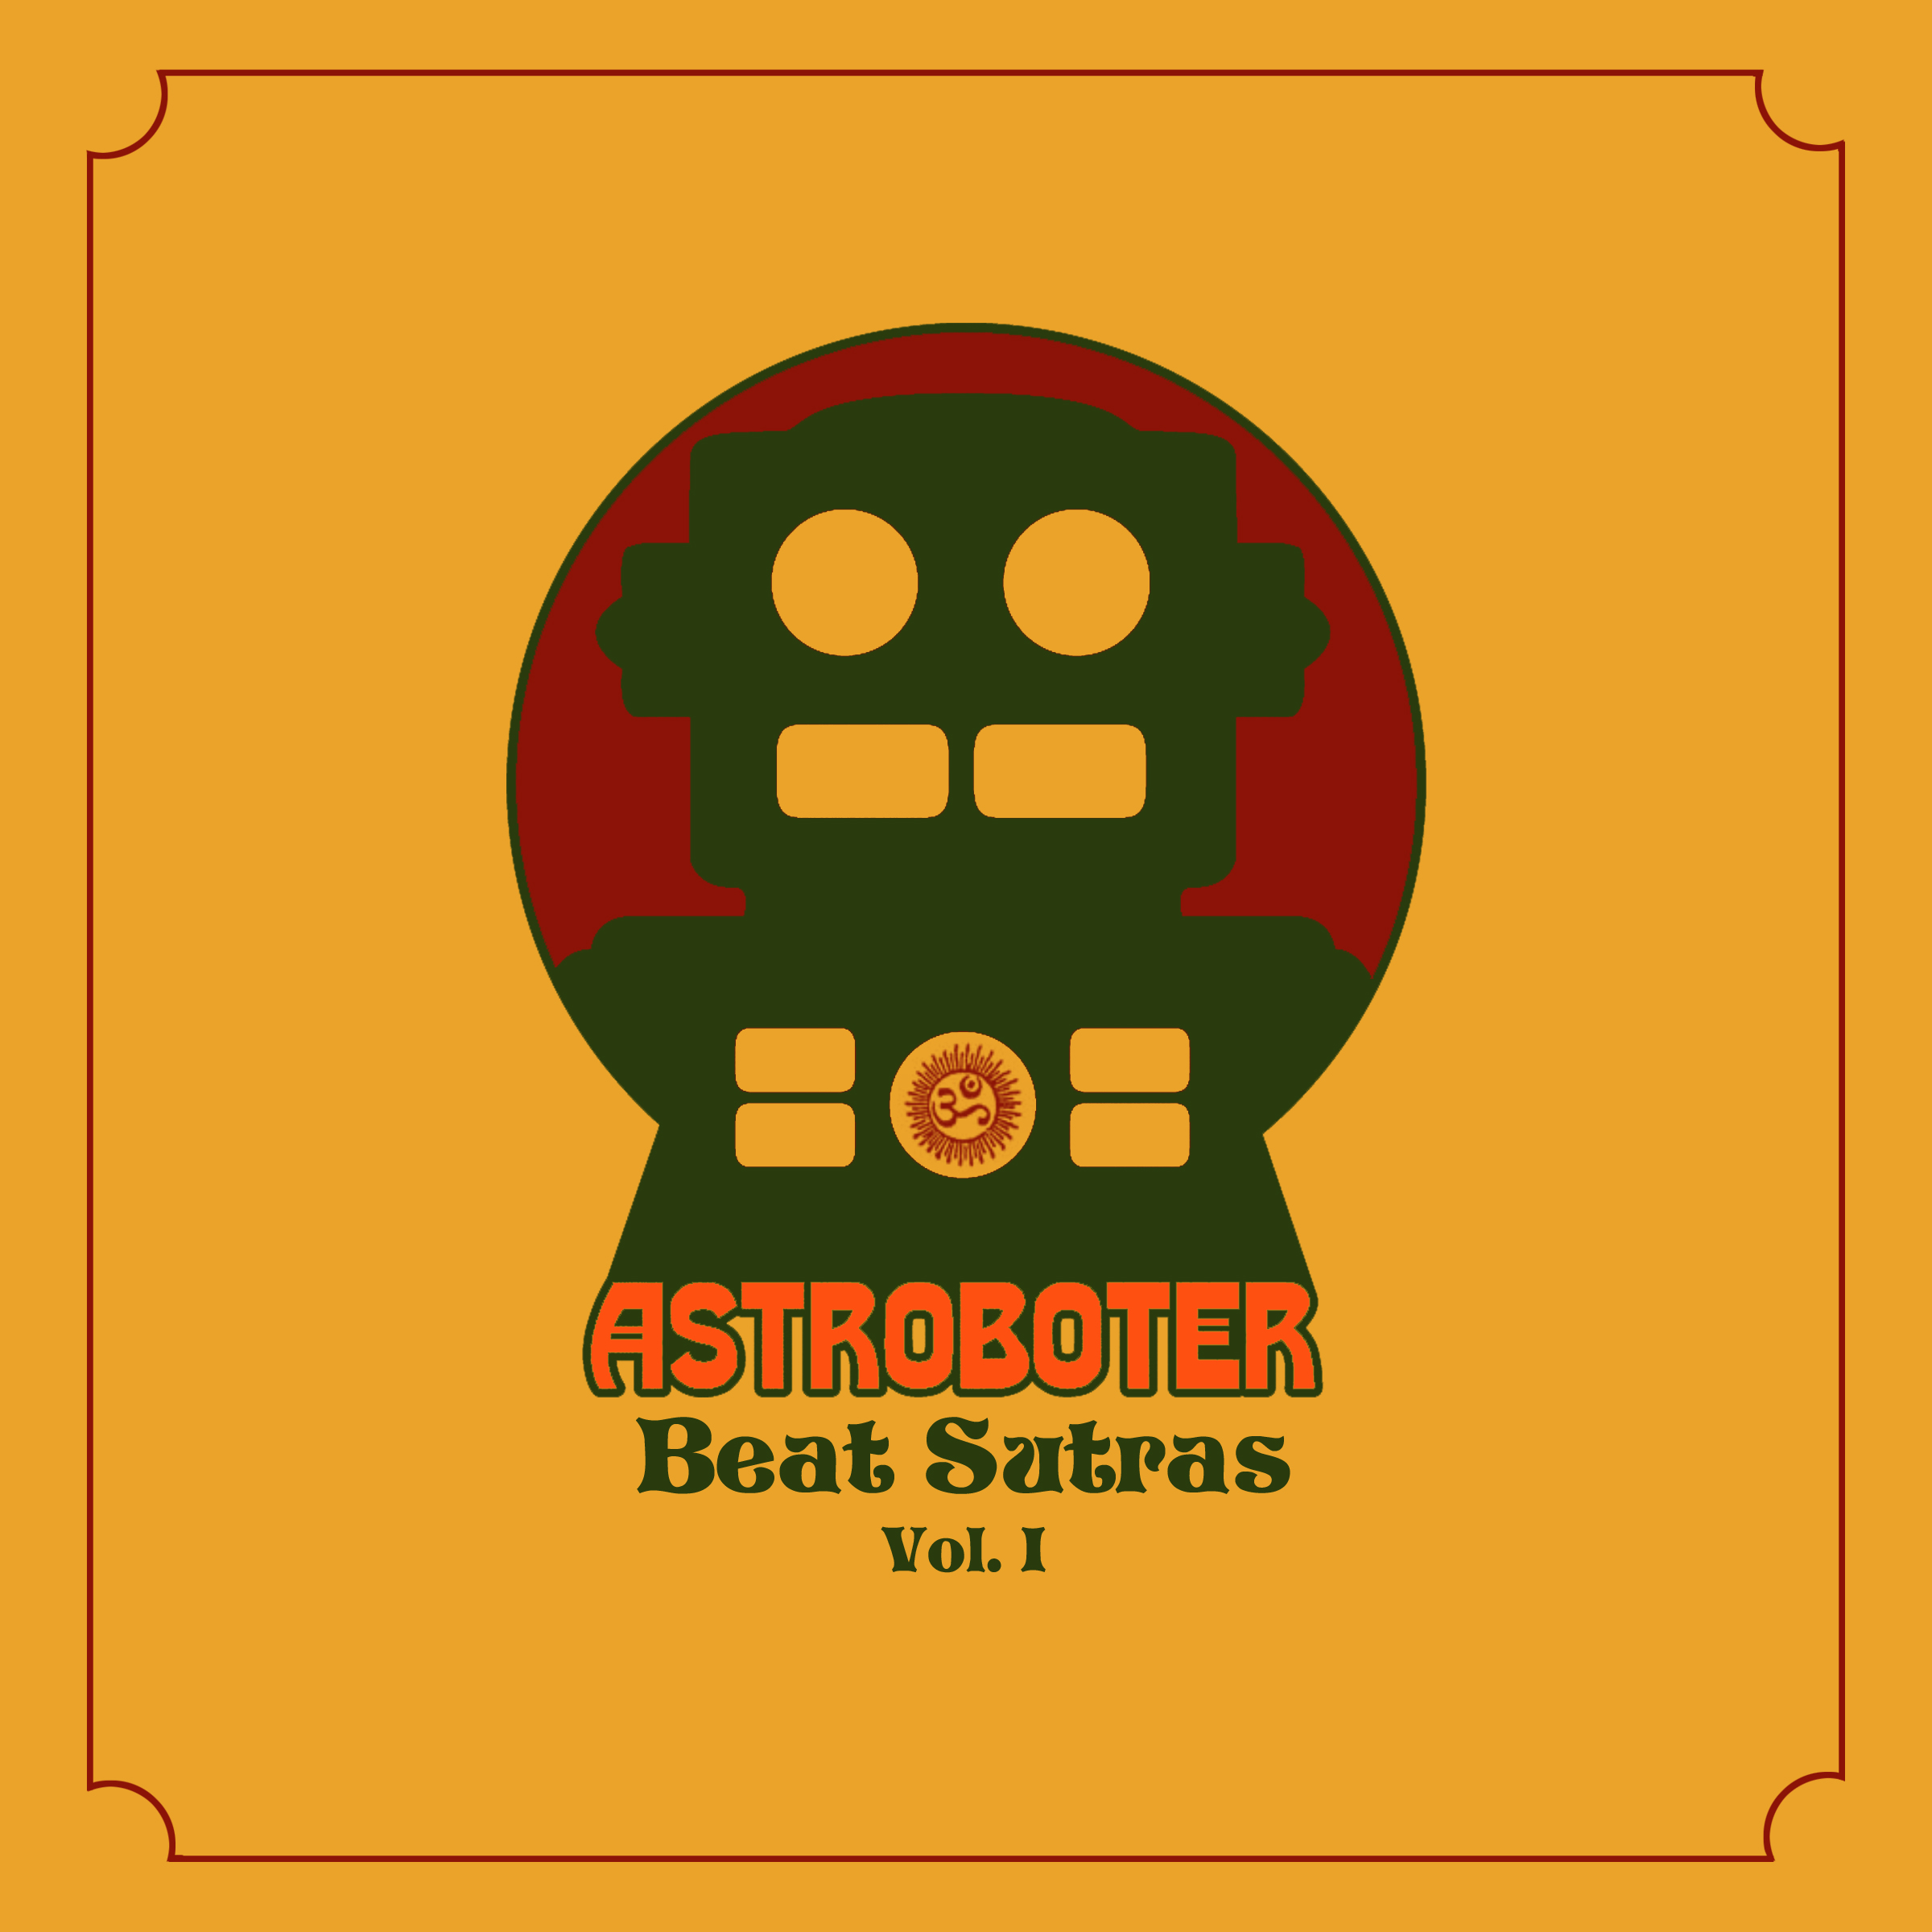 Free Download: Astroboter – Beat Sutras Vol. I